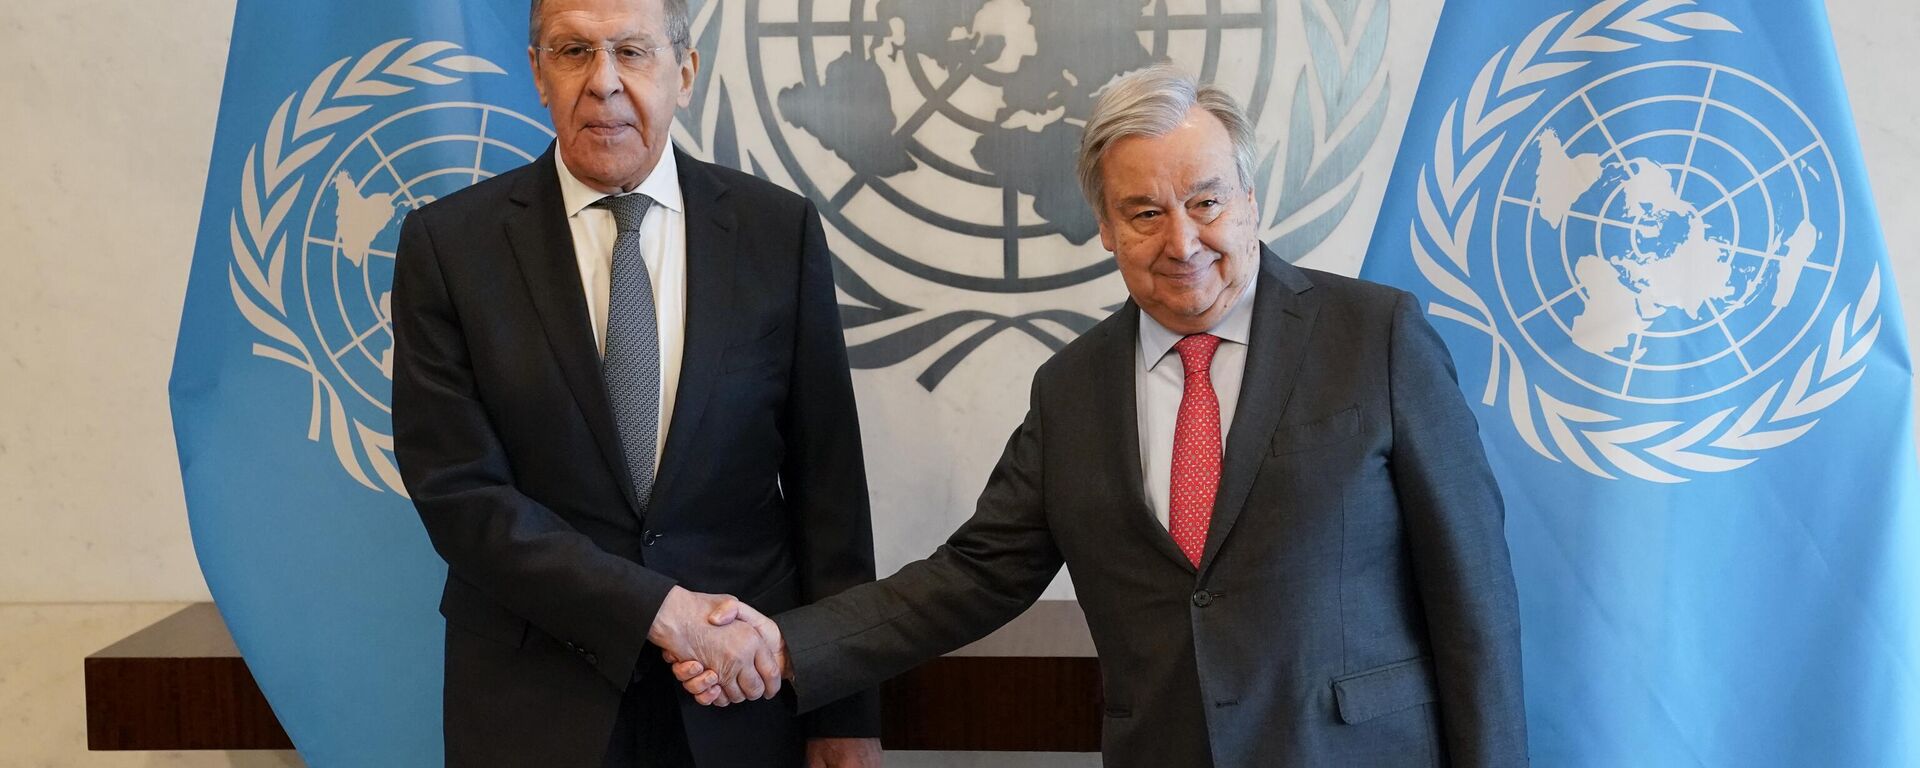 Antonio Guterres, United Nations Secretary General, right, and Sergey Lavrov, Russia's Minister for Foreign Affairs, current president of the Security Council, shake hands at the top of a meeting at the secretariat offices, Monday, April 24, 2023, at United Nations headquarters. - Sputnik International, 1920, 25.04.2023